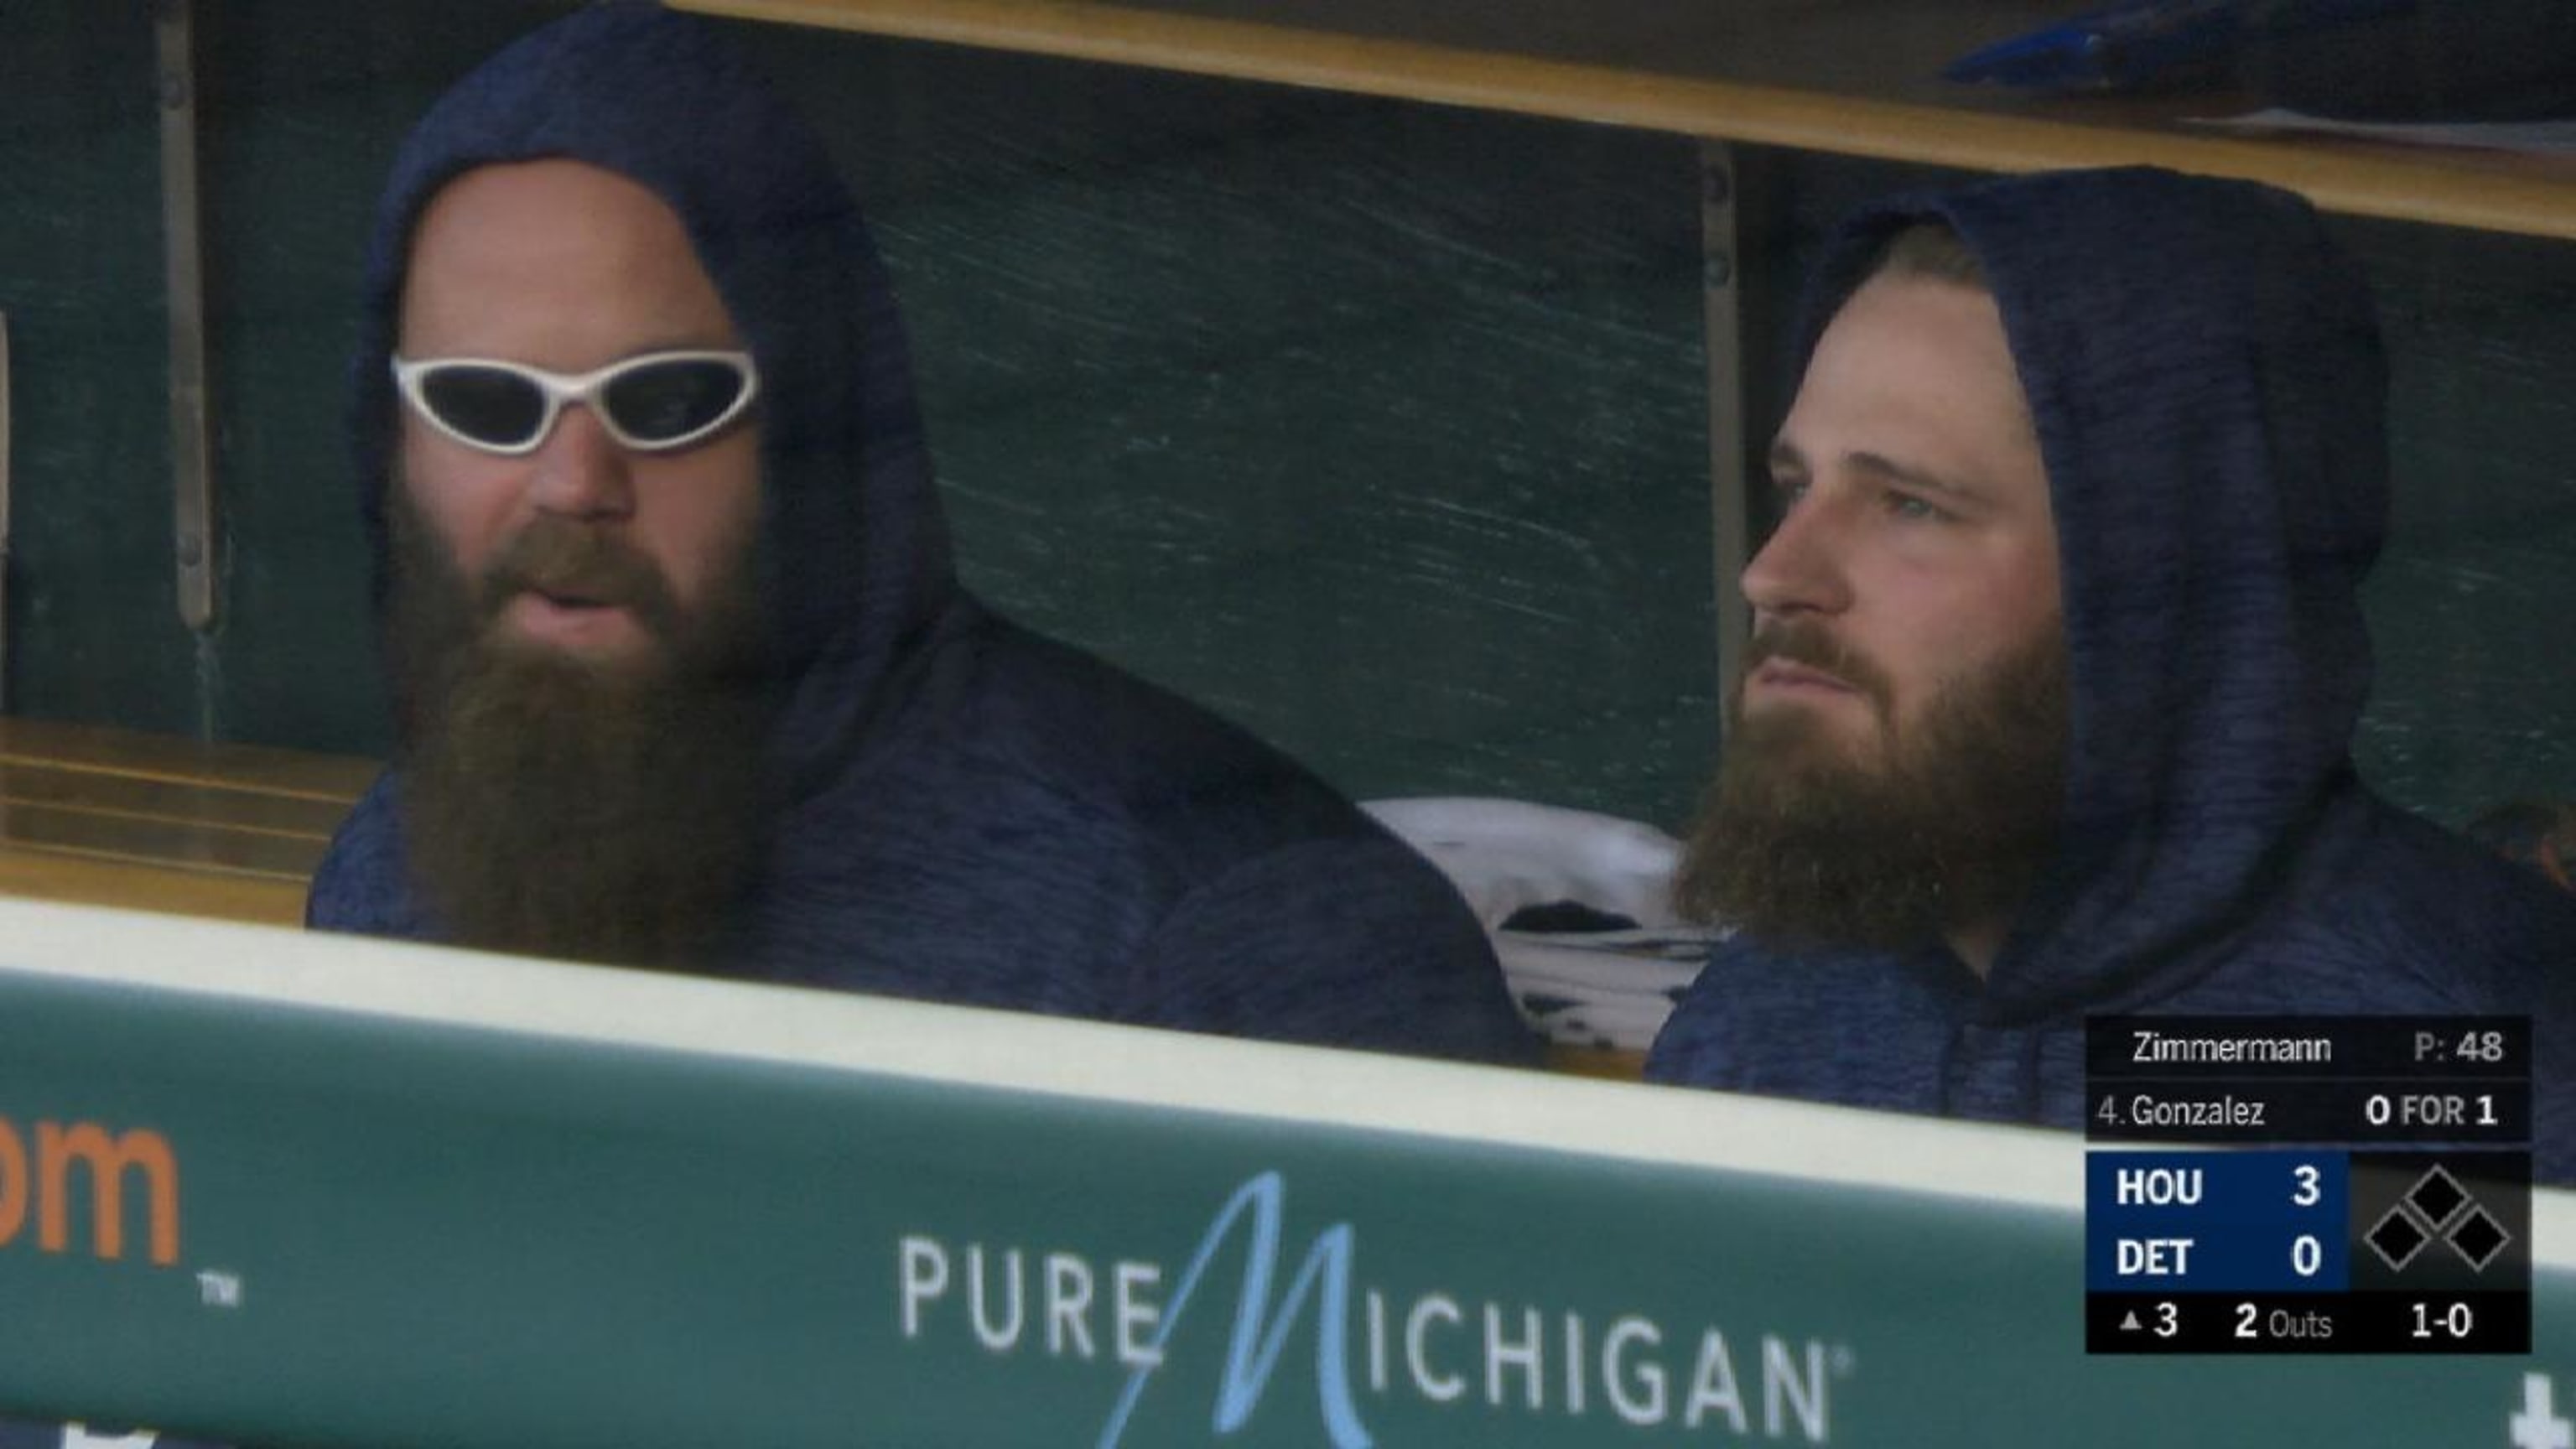 Evan Gattis and Tyler White matched their look so efficiently it's hard to  tell who's who